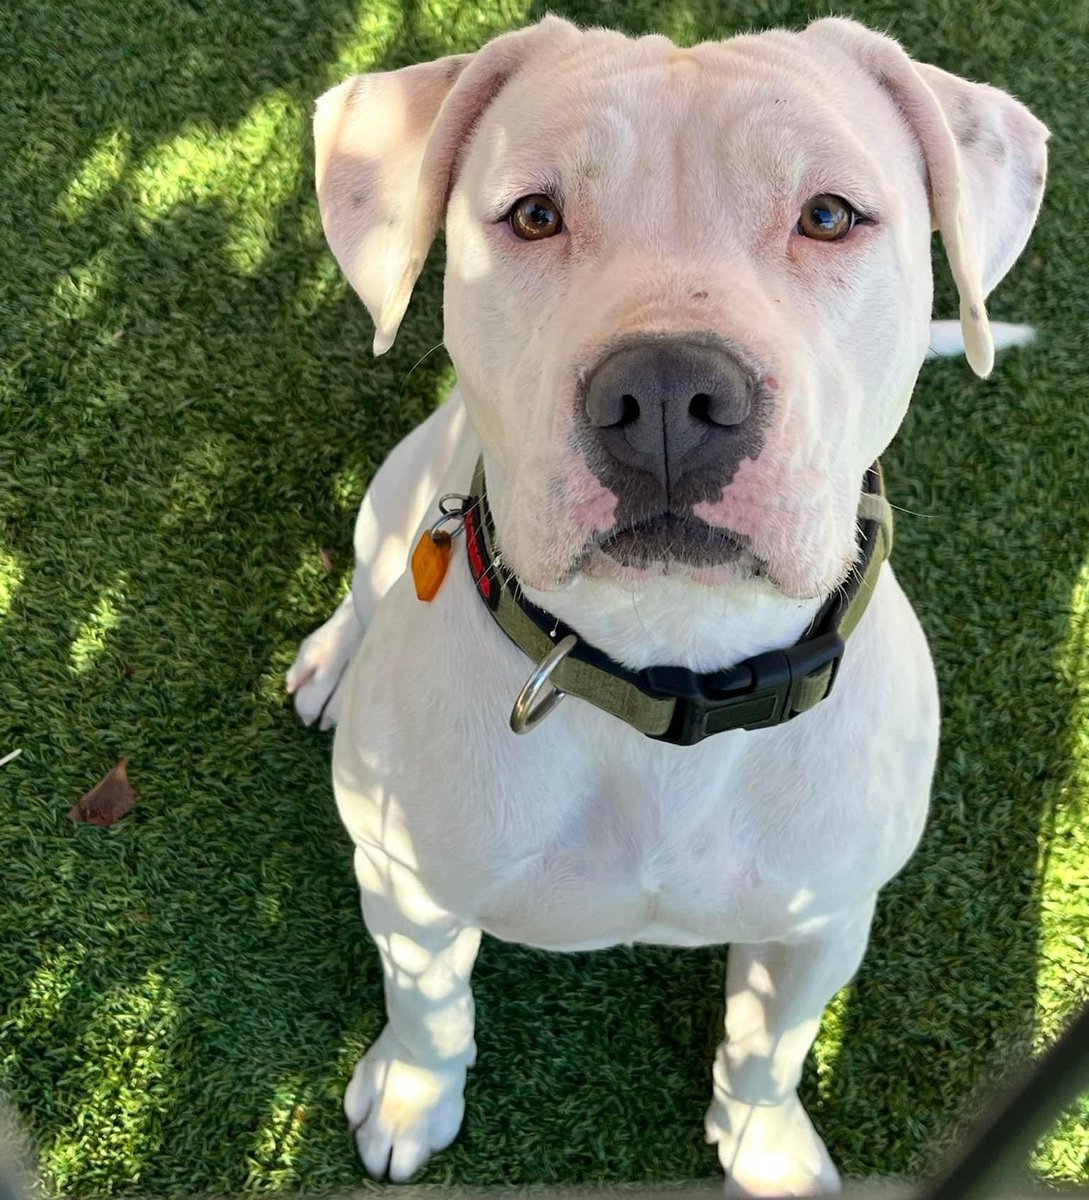 #petoftheday Faith is a sweet 2 y/o medium Pitt Mix who has been looking for her forever family for over a year. She loves playing with other dogs, playing ball, and a good Starbucks pup cup! 📷 Contact: Shelter on the Hill: A Humane Society 📷 Visit: shelteronthehill.org/adoptions.html